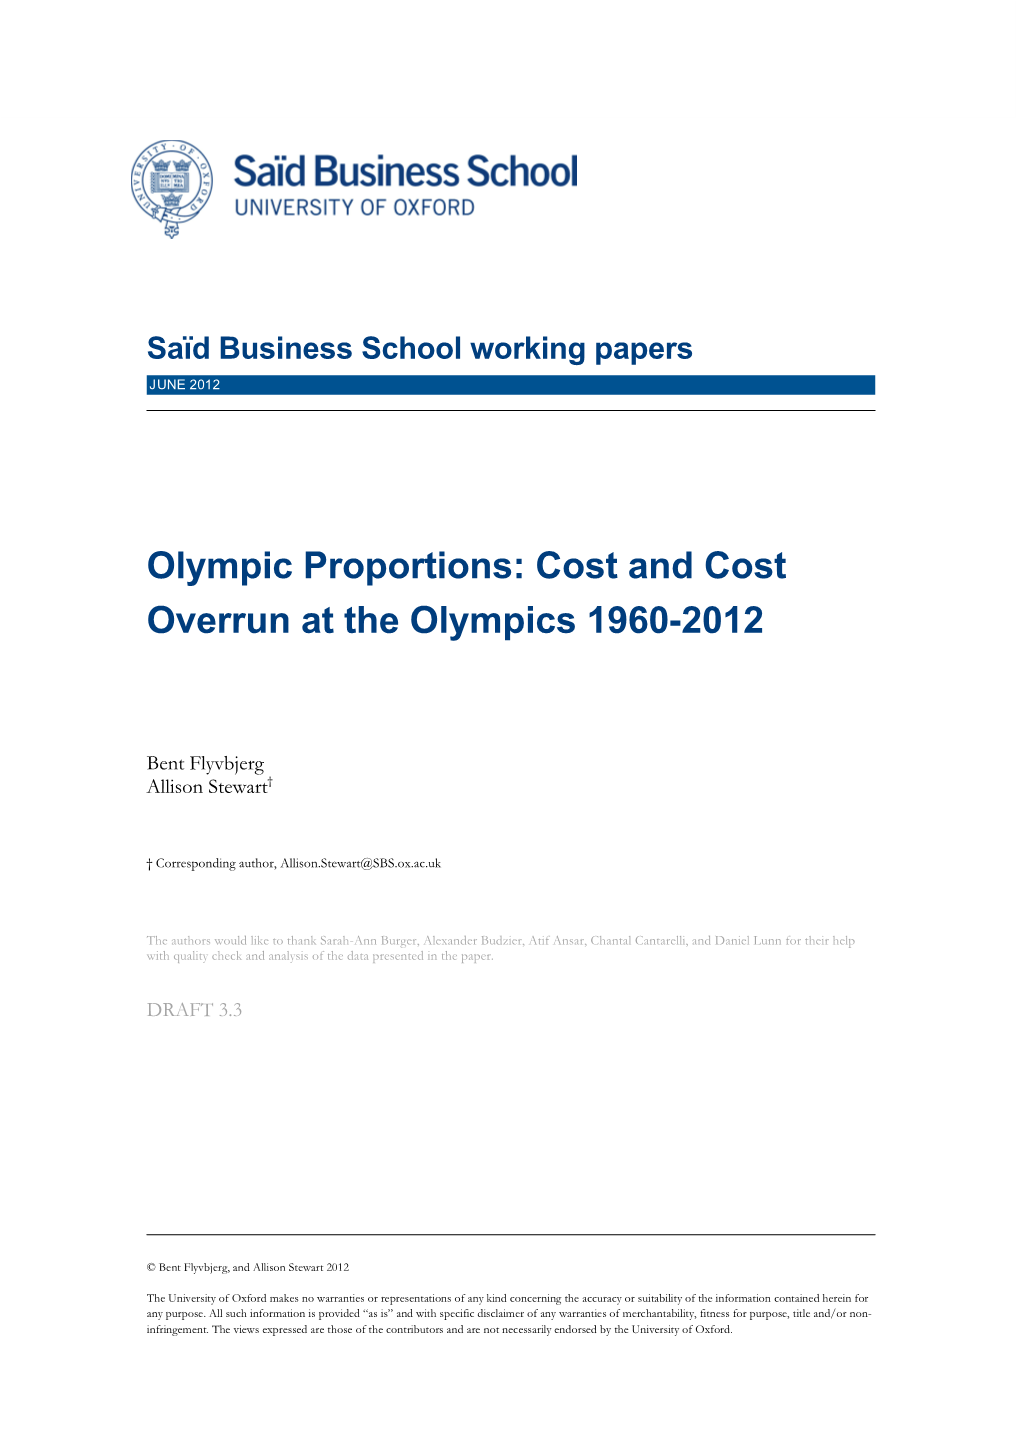 Cost and Cost Overrun at the Olympics 1960-2012